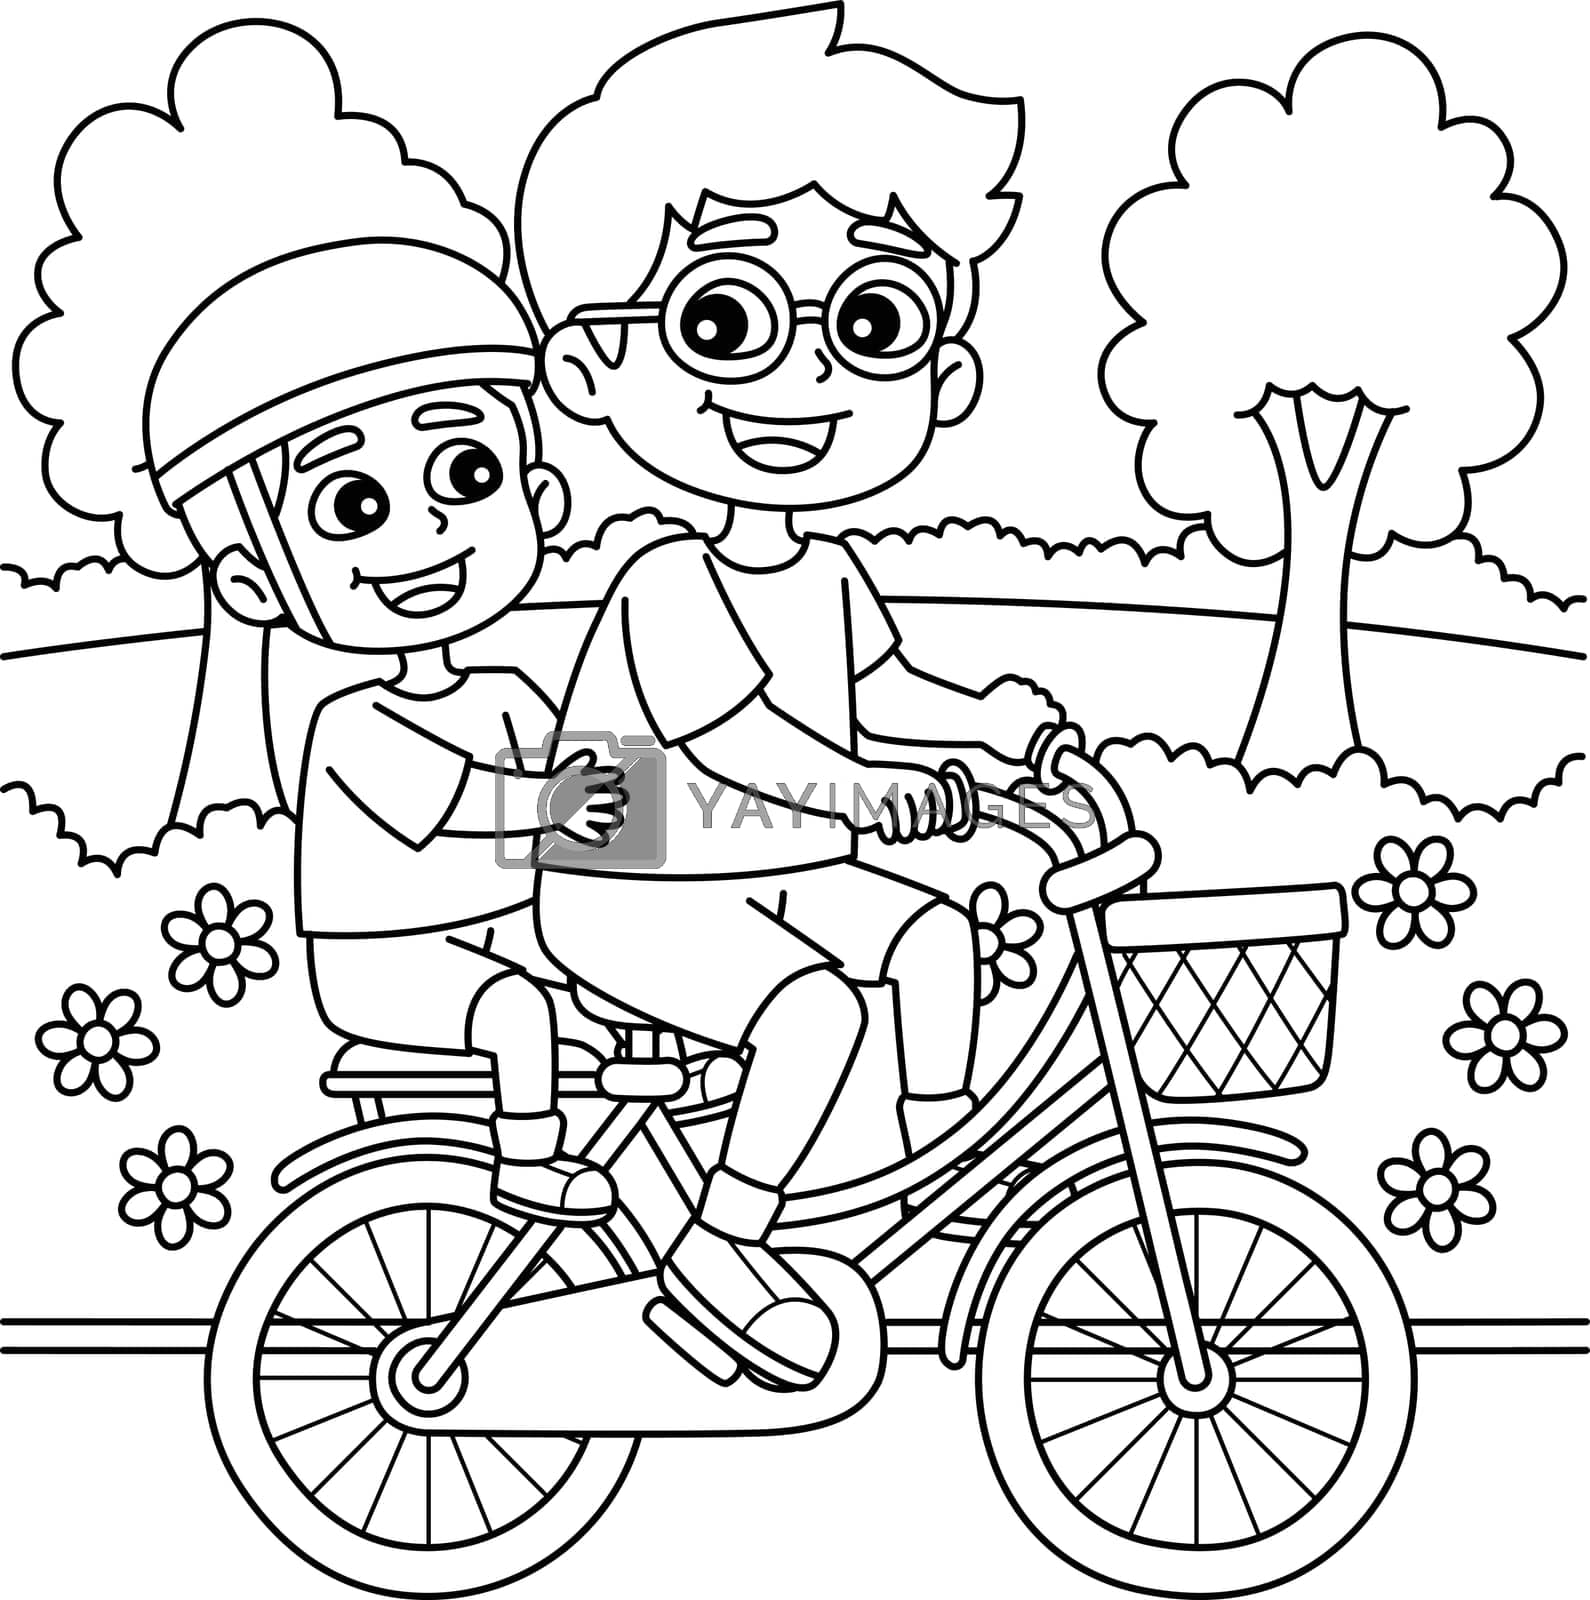 Royalty free image of Father and Son Riding a Bike Coloring Page by abbydesign